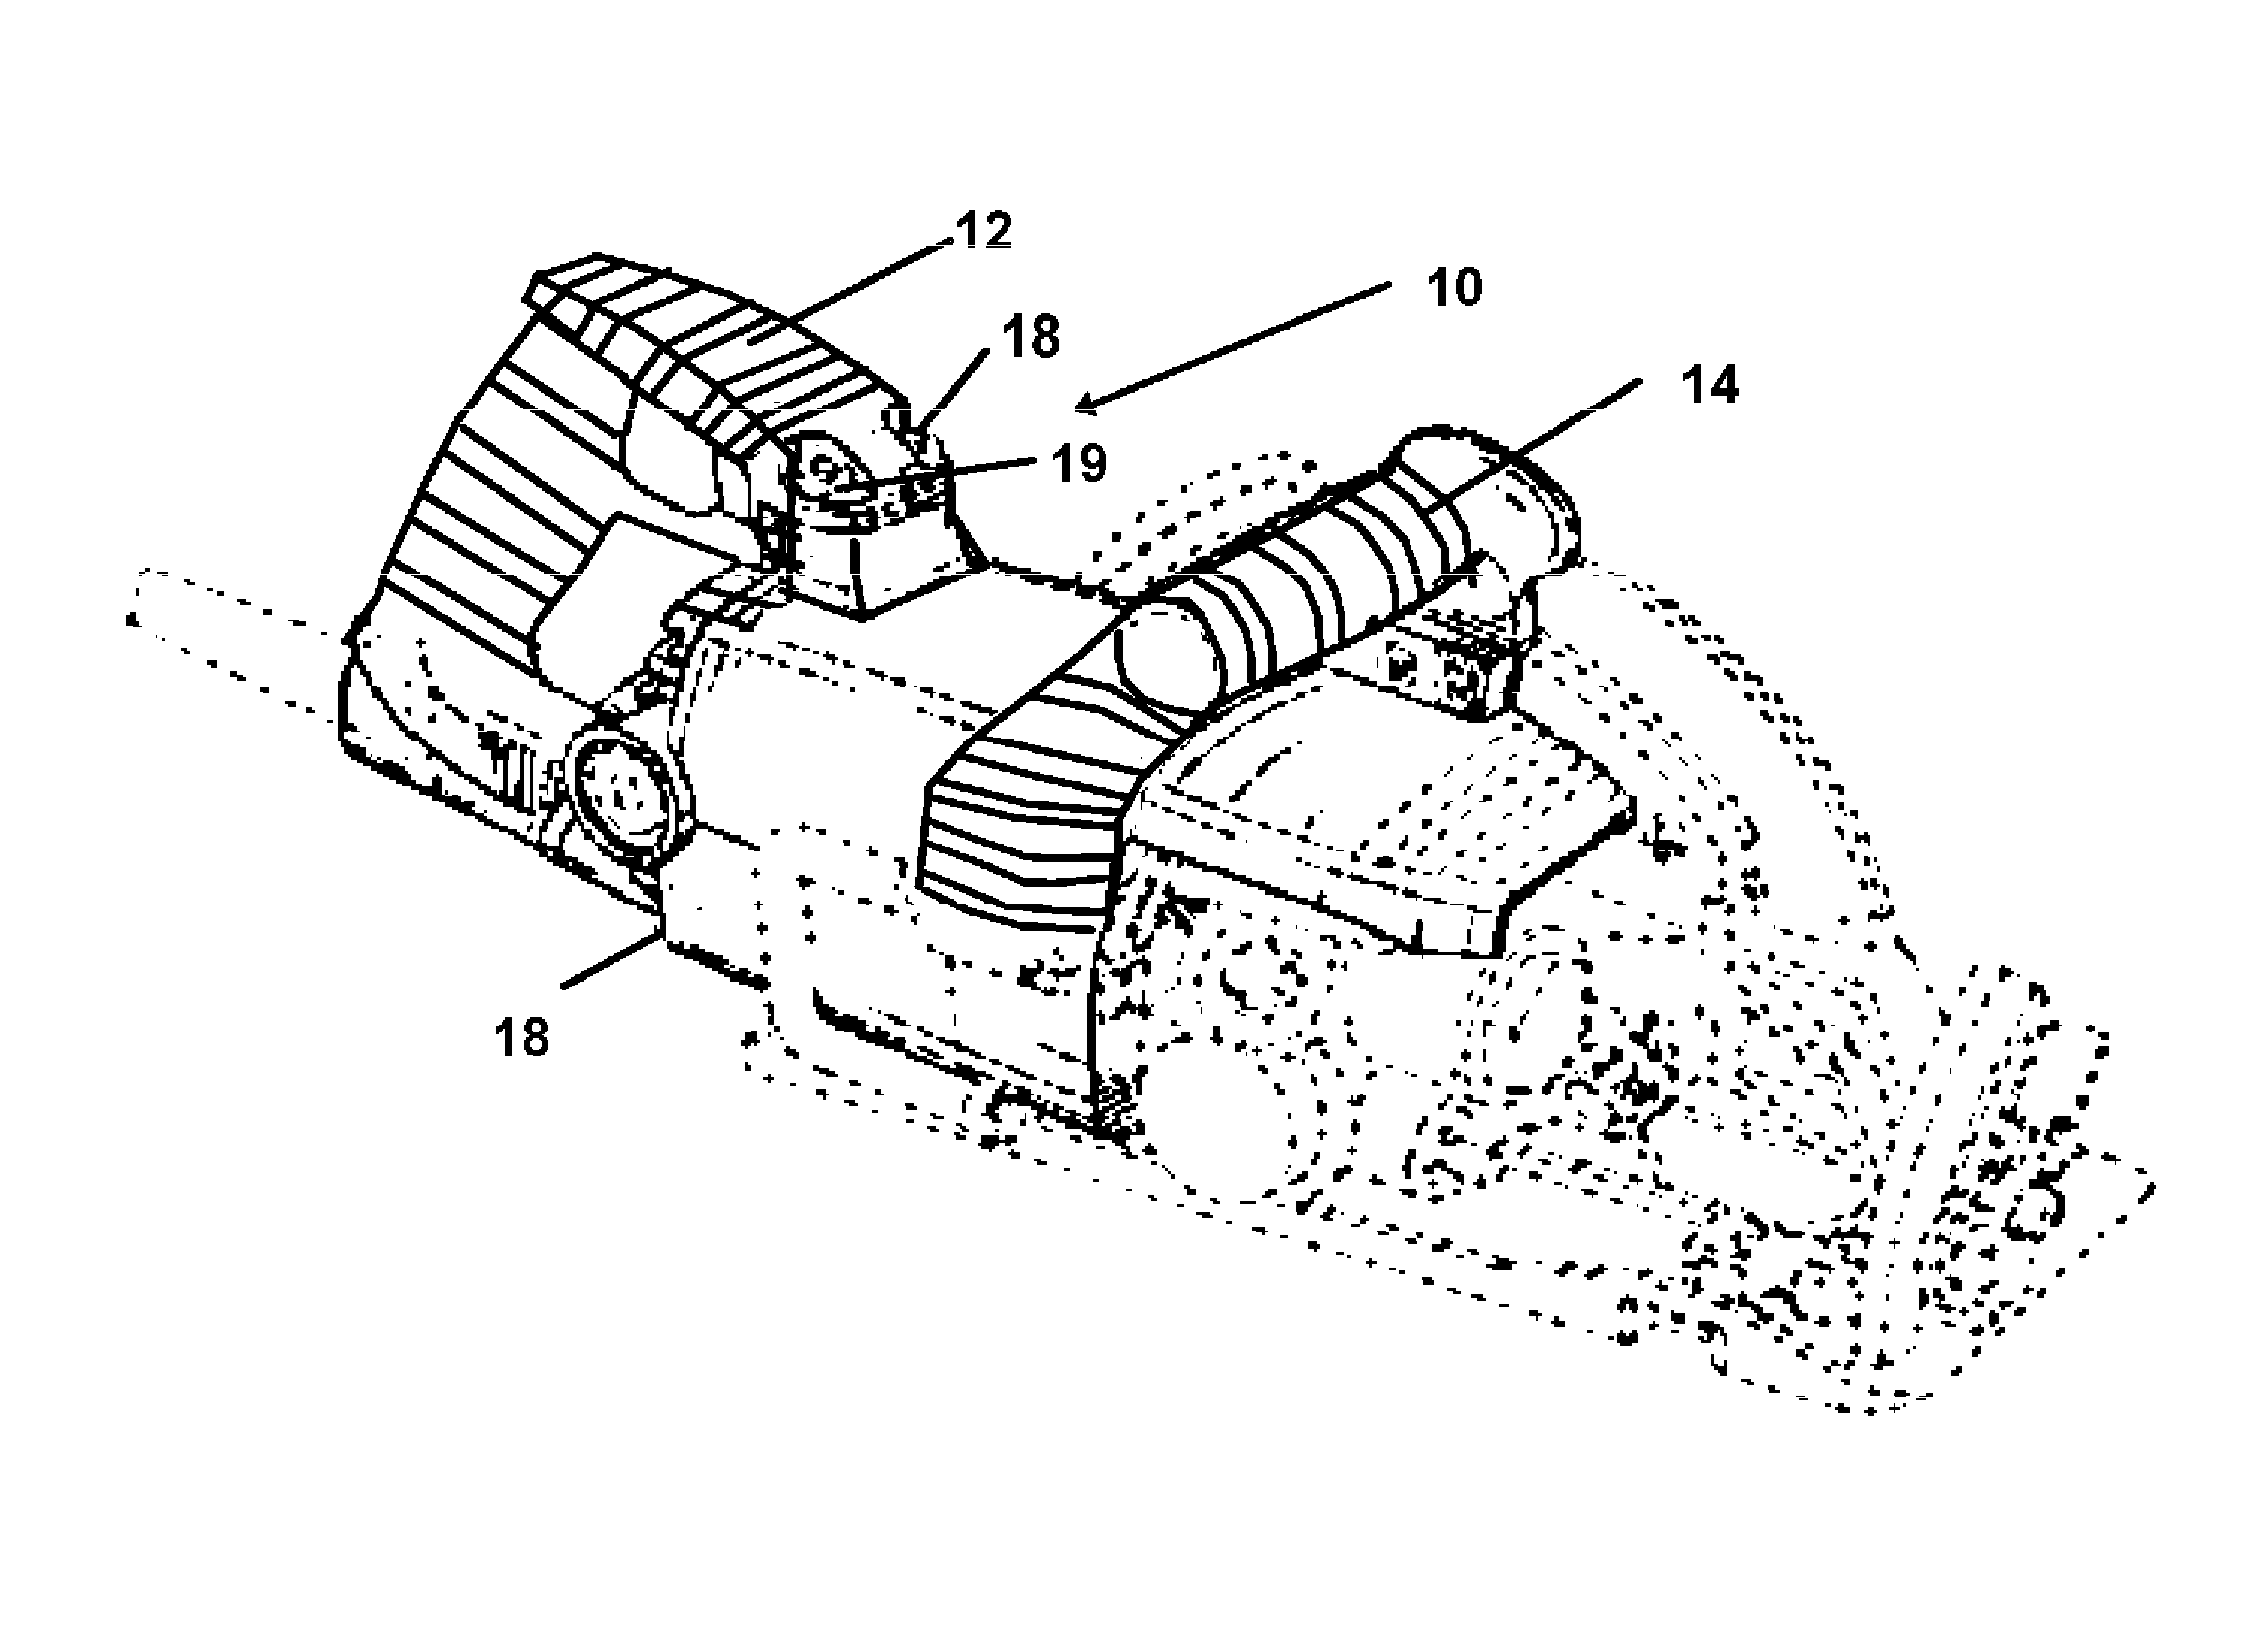 Device and method for tool identification and tracking